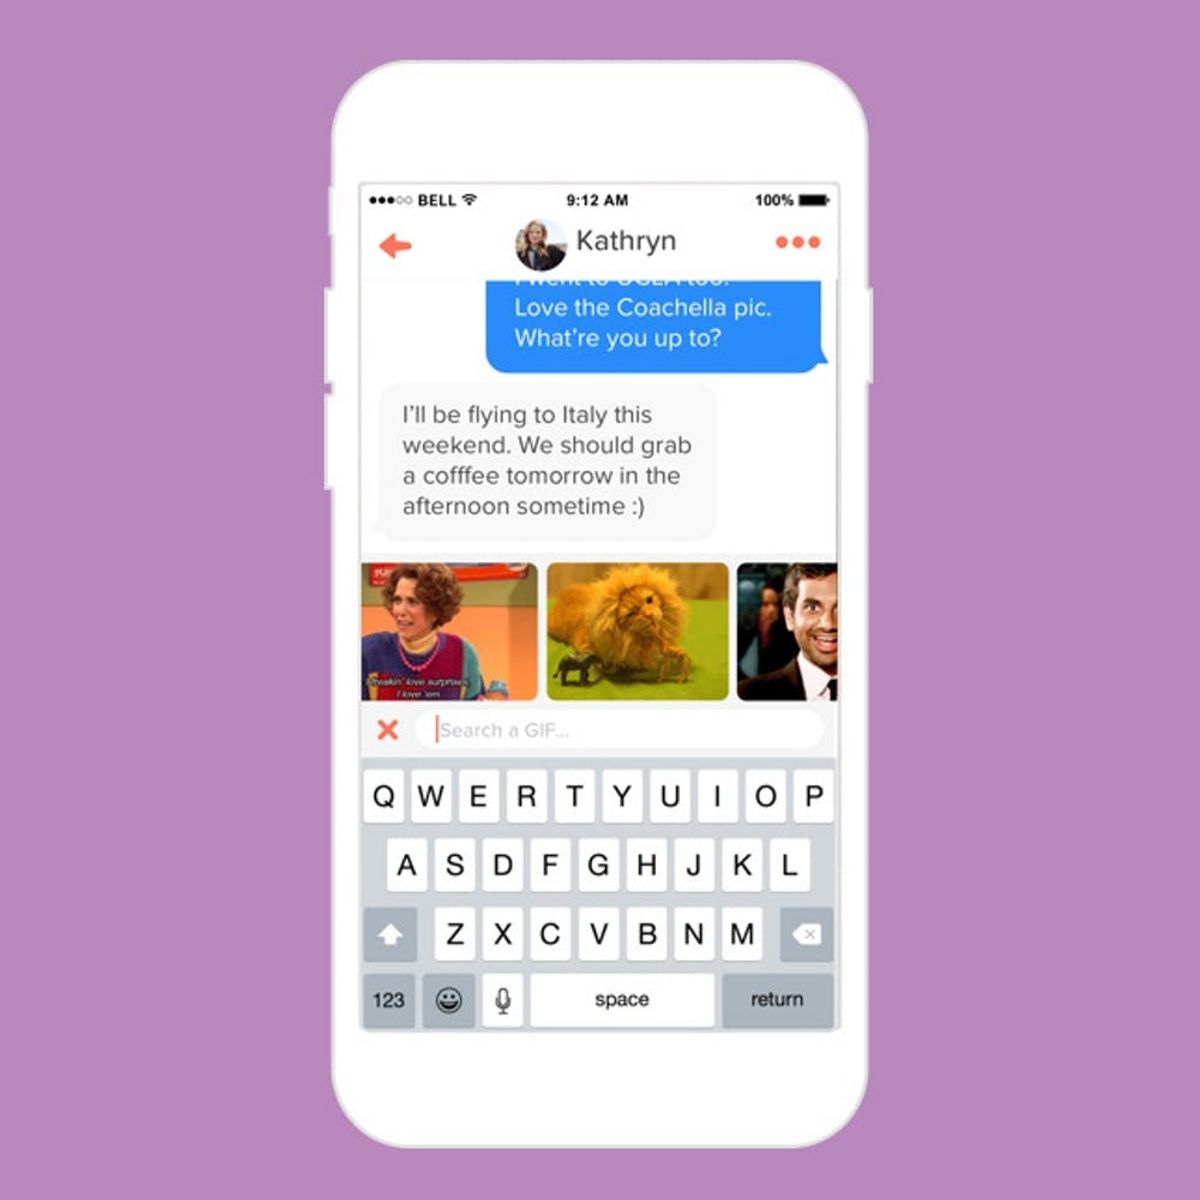 Uh-Oh: You Can Now Send GIFs on Tinder